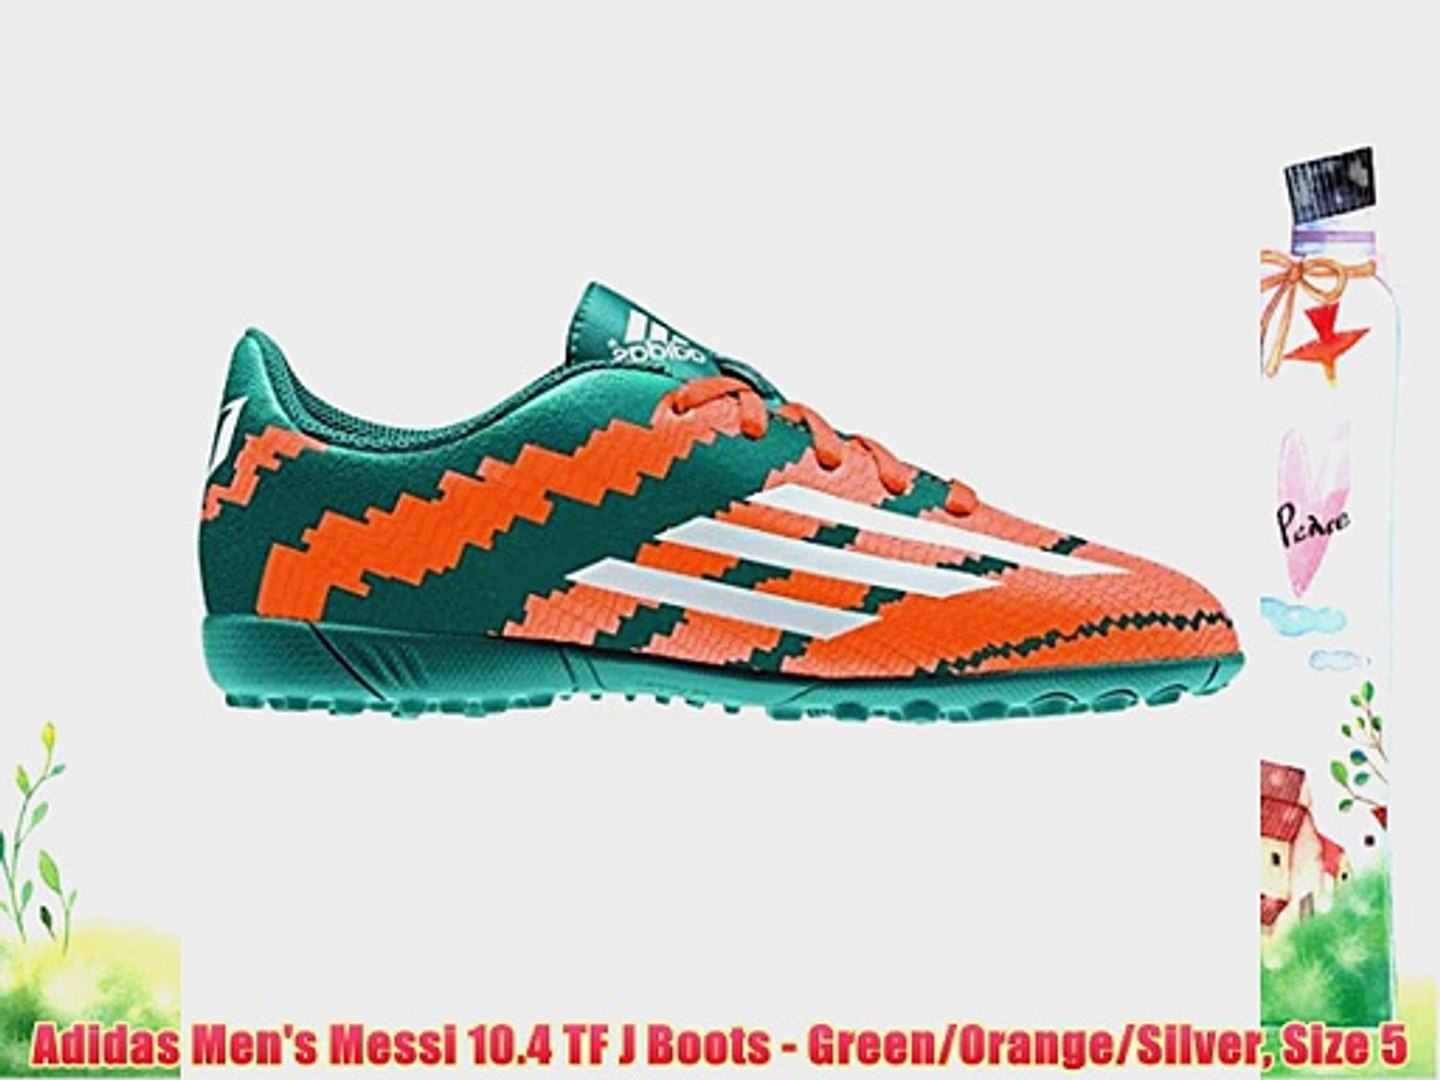 Adidas Men S Messi 10 4 Tf J Boots Green Orange Silver Size 5 Video Dailymotion